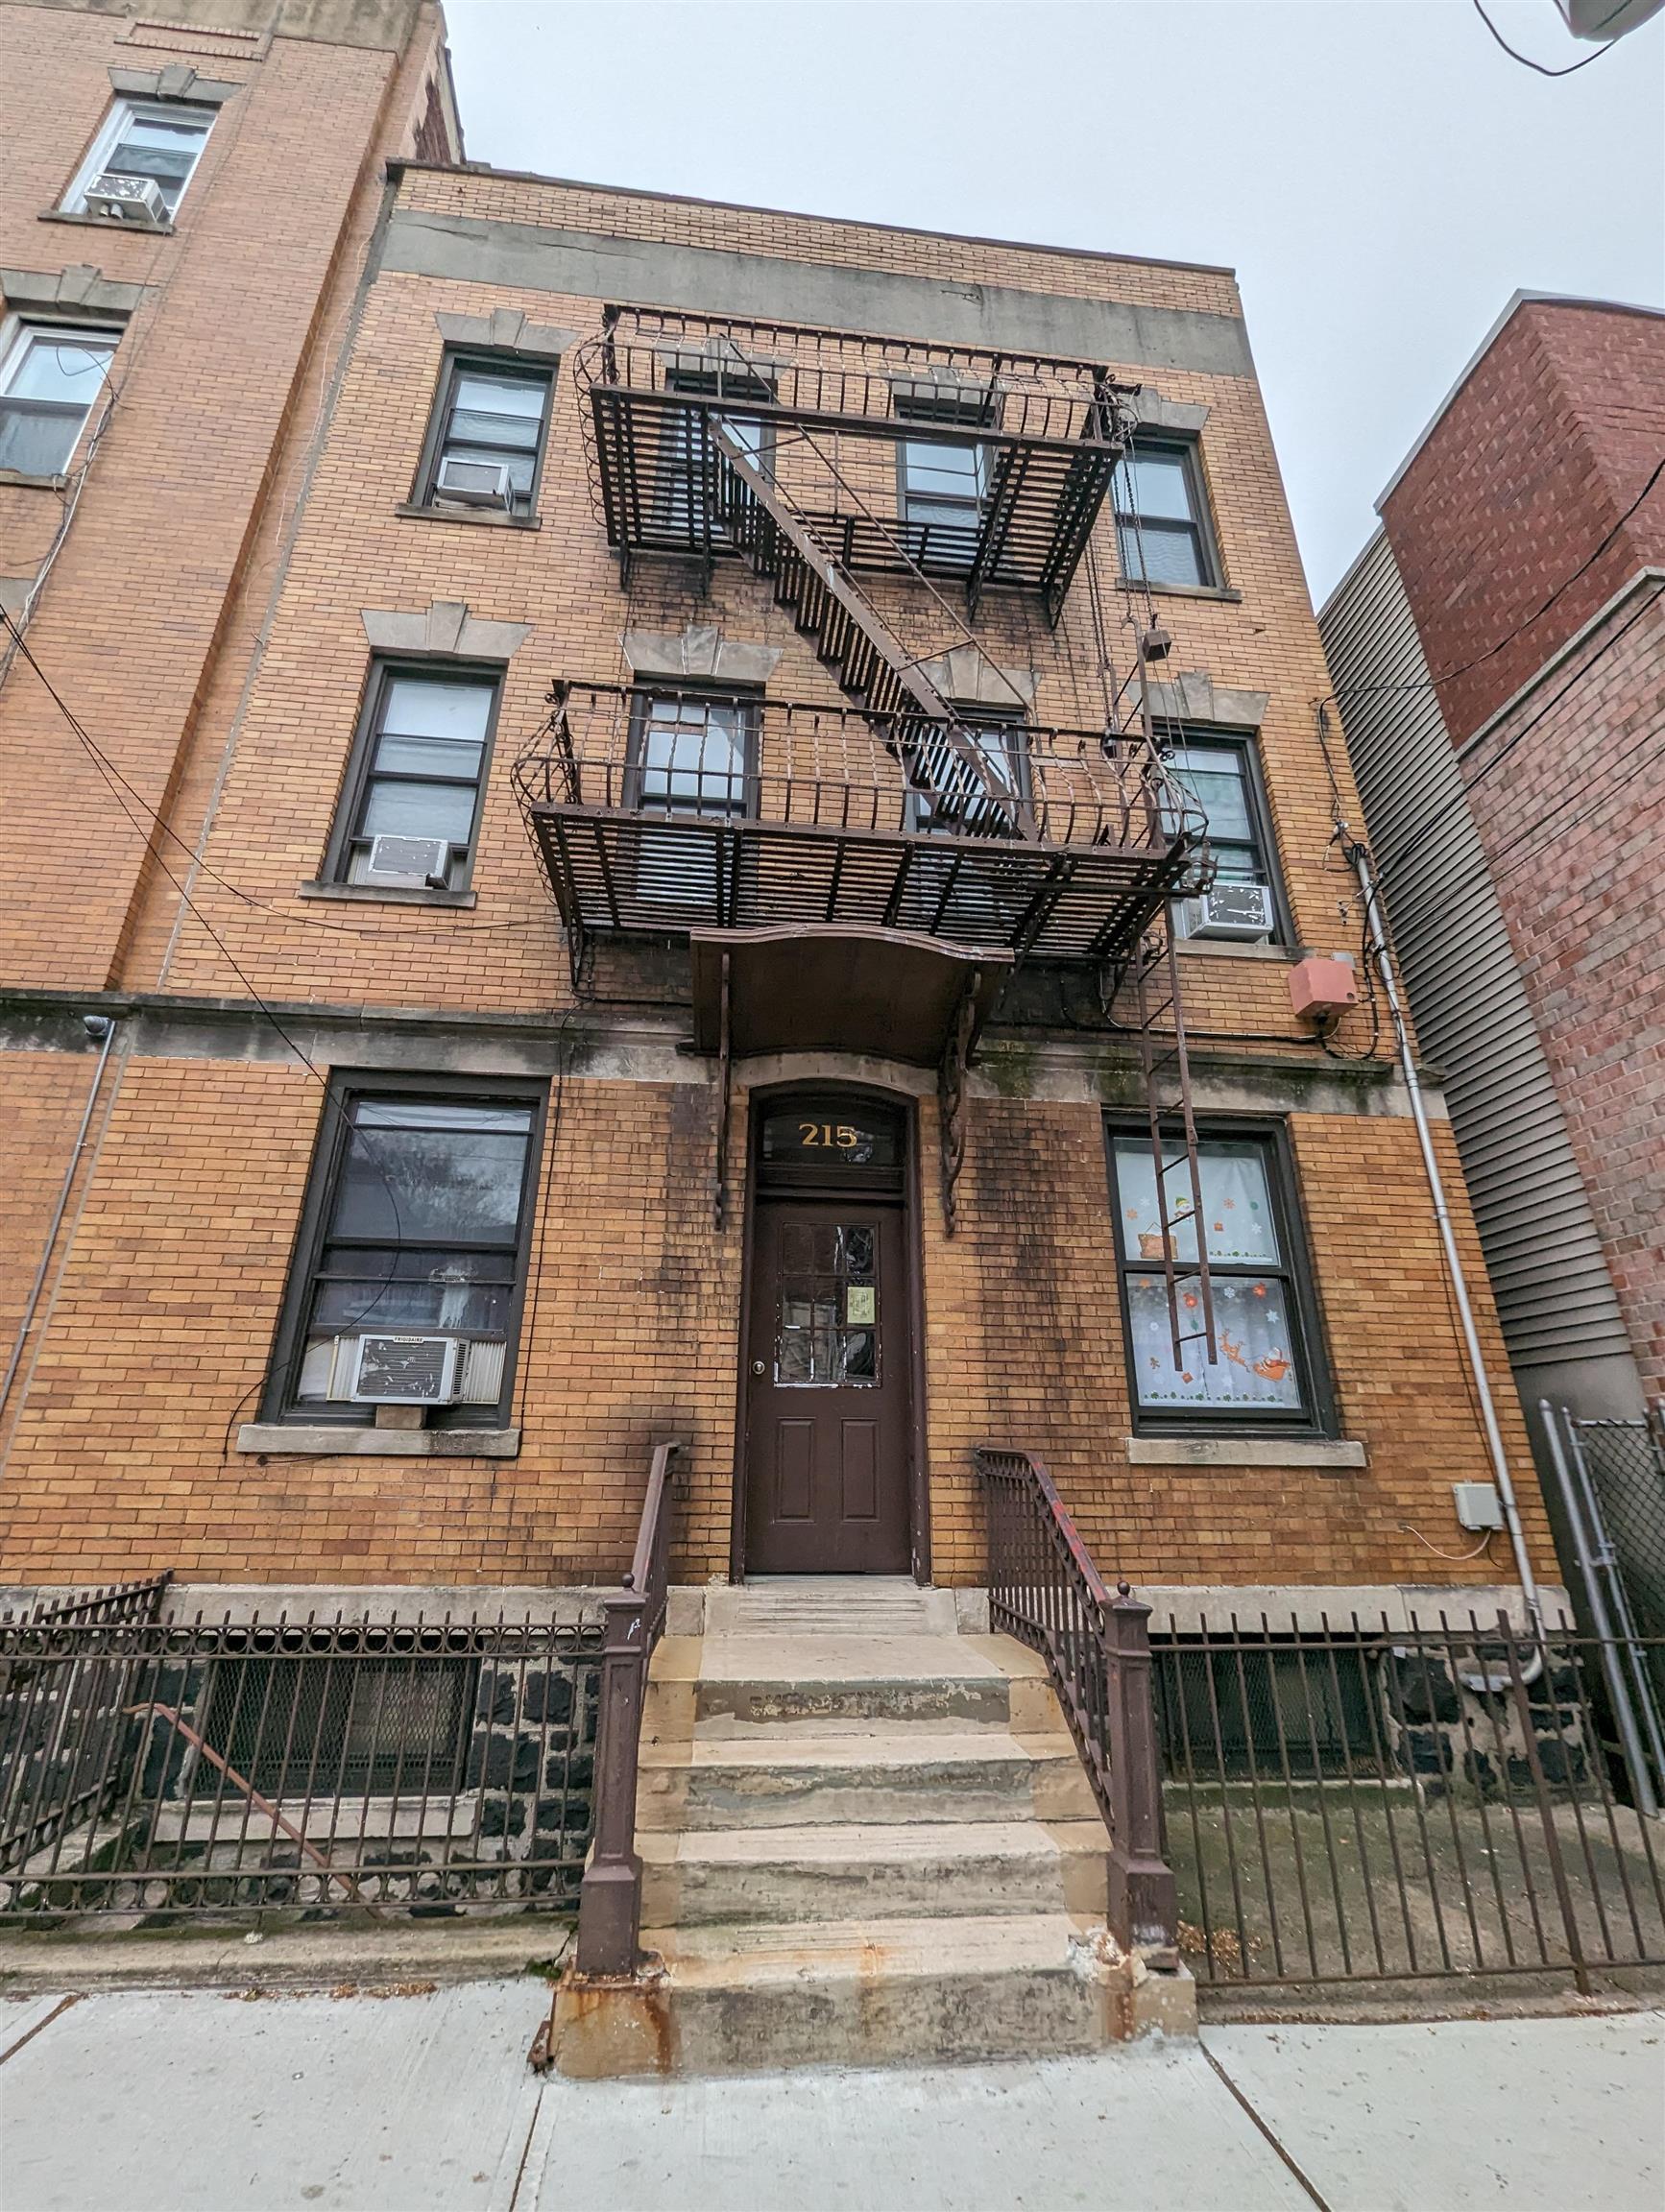 # 240008399 - For Rent in West New York NJ